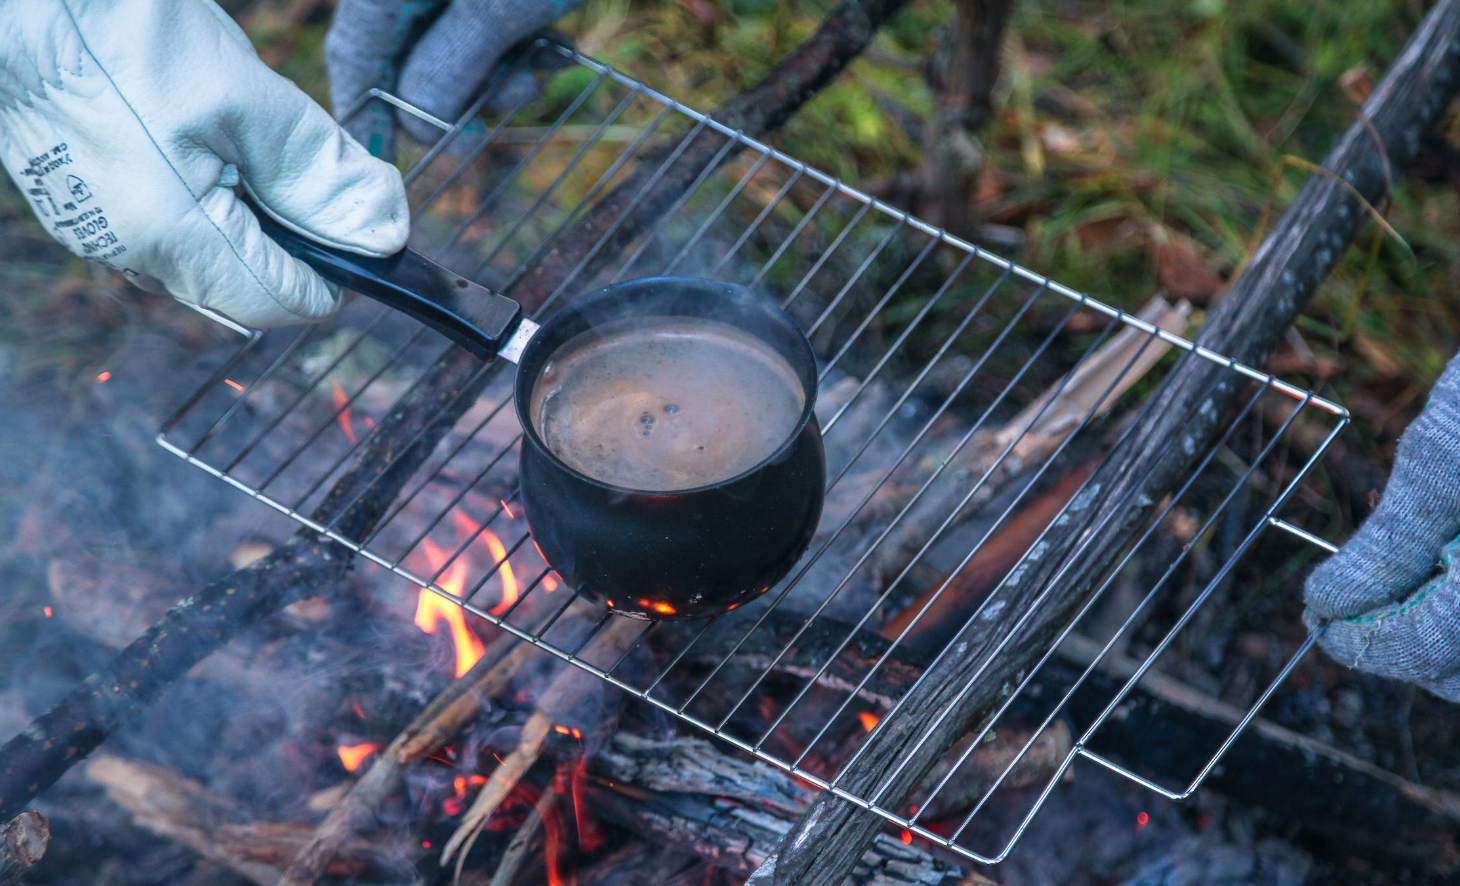 cowboy coffee pot boiling over open campfire burn steam cook